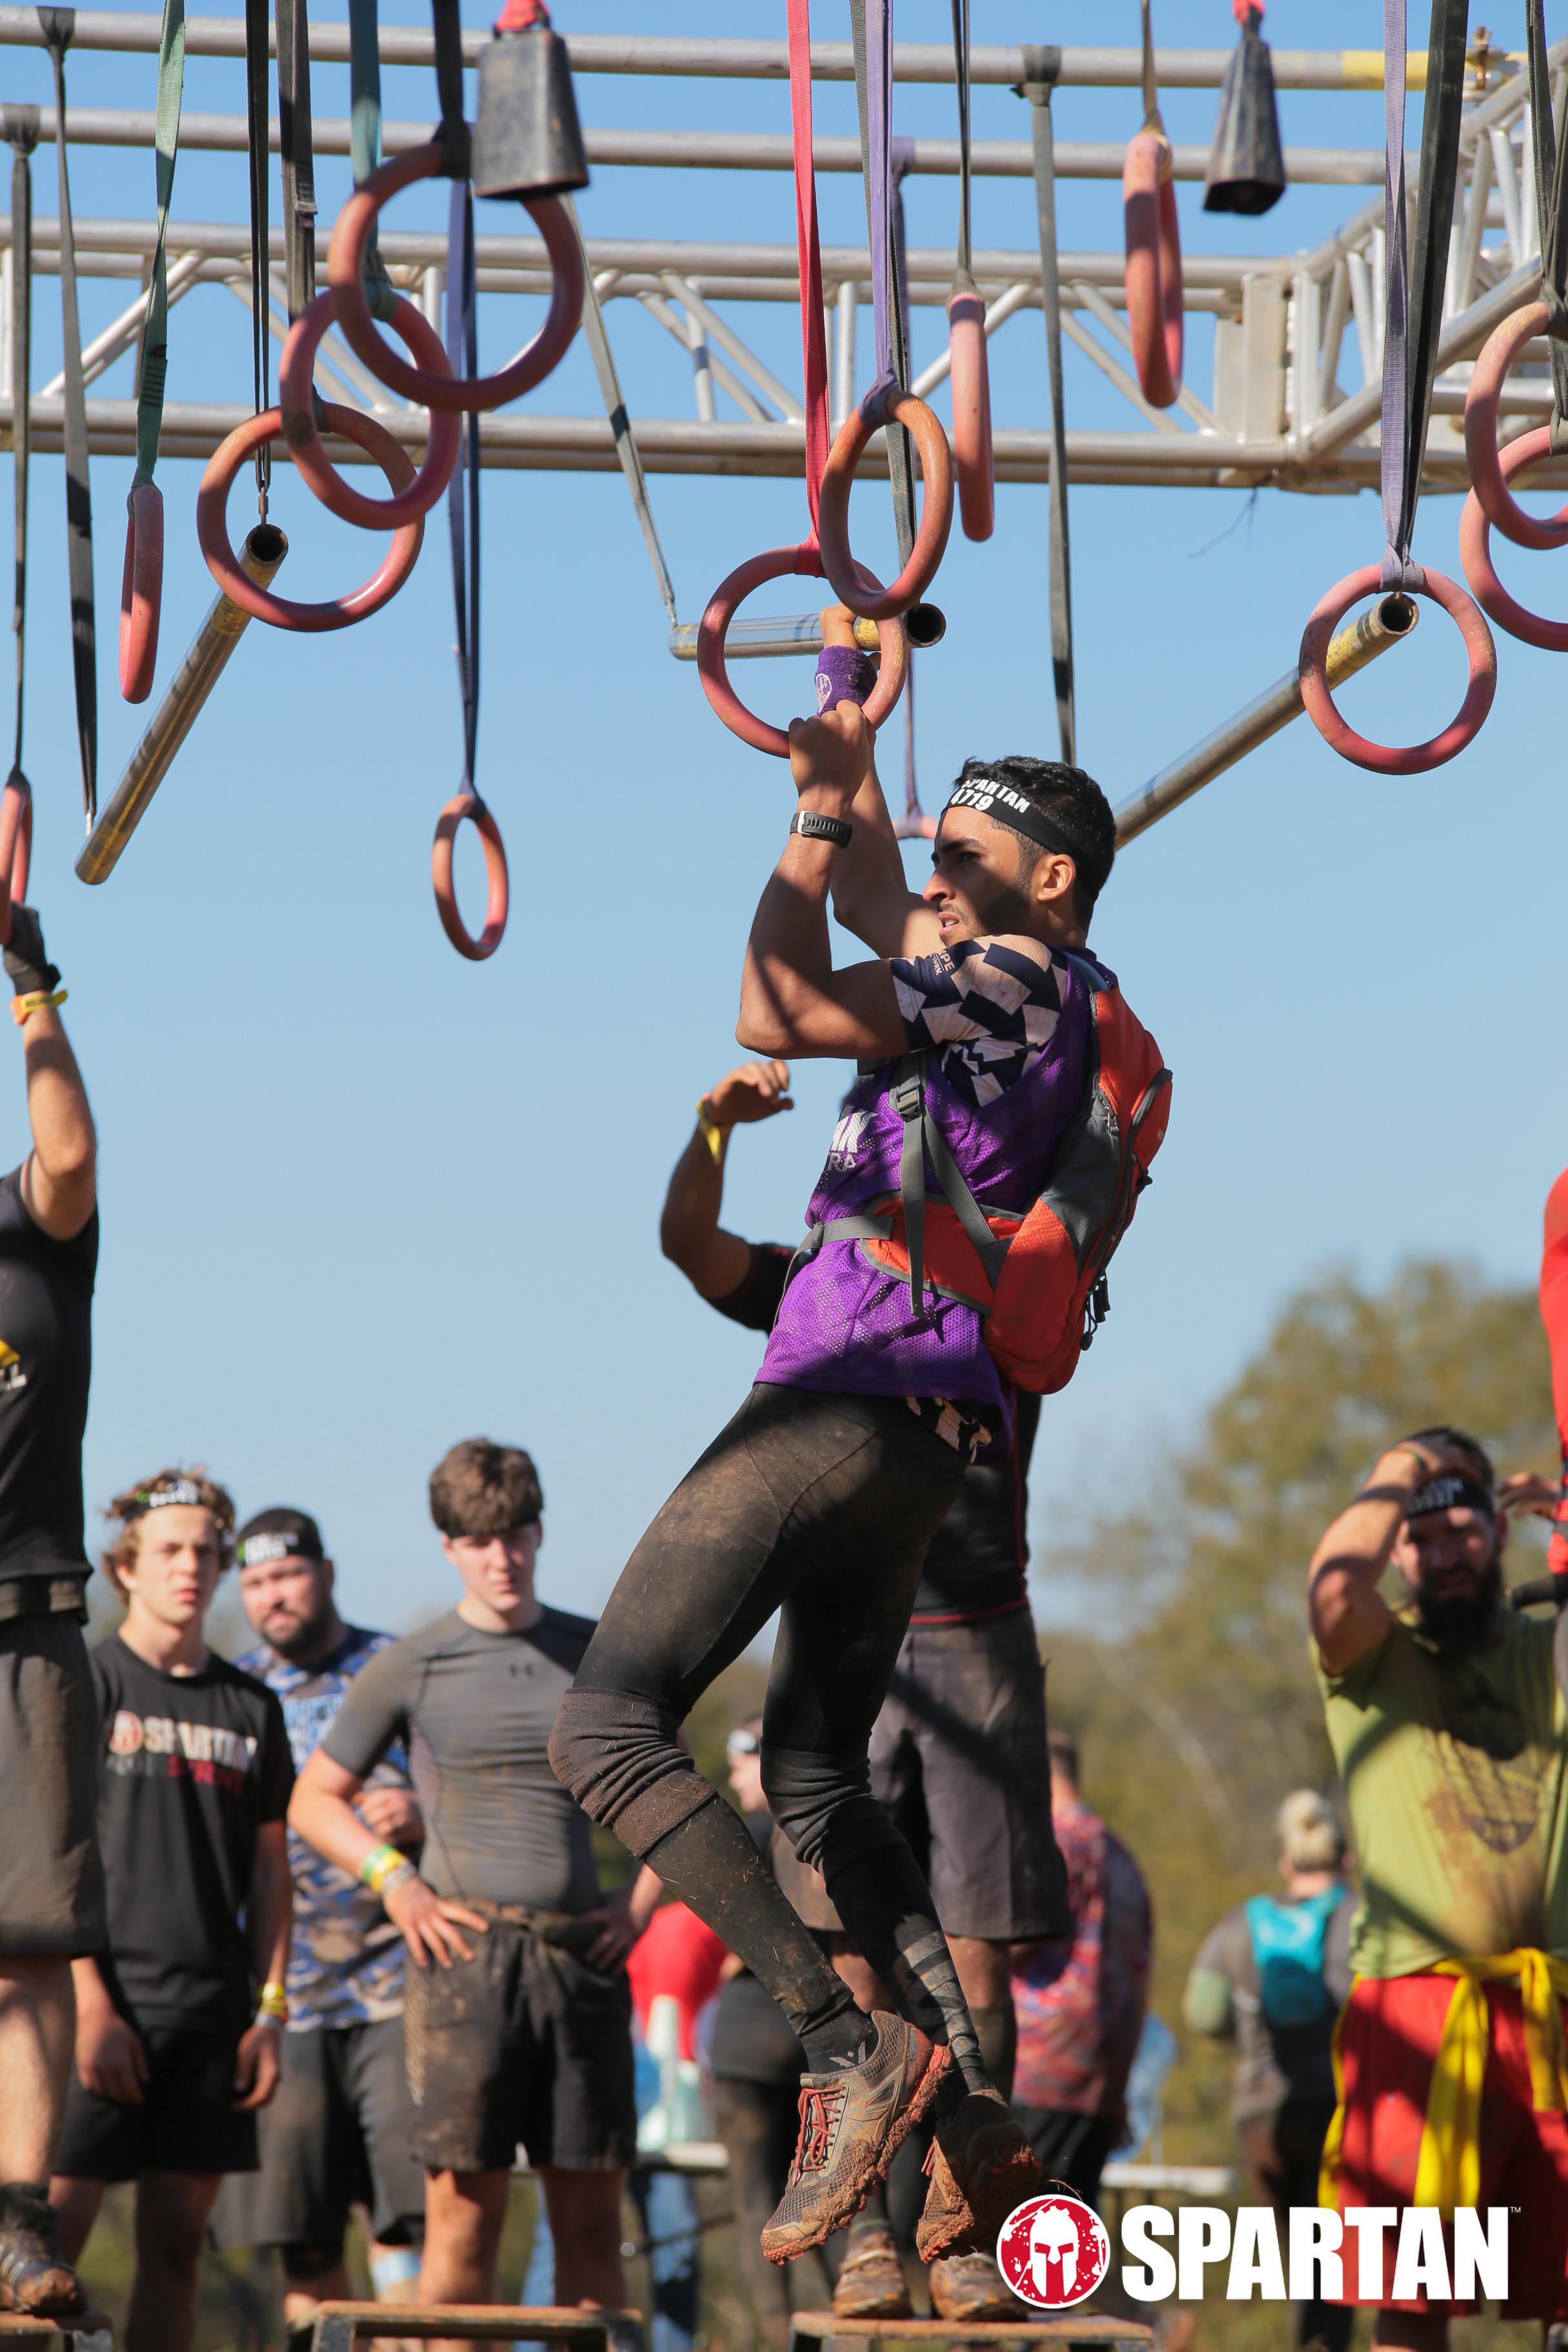 Spartan Race: Thousands tackle obstacles, terrain, Article